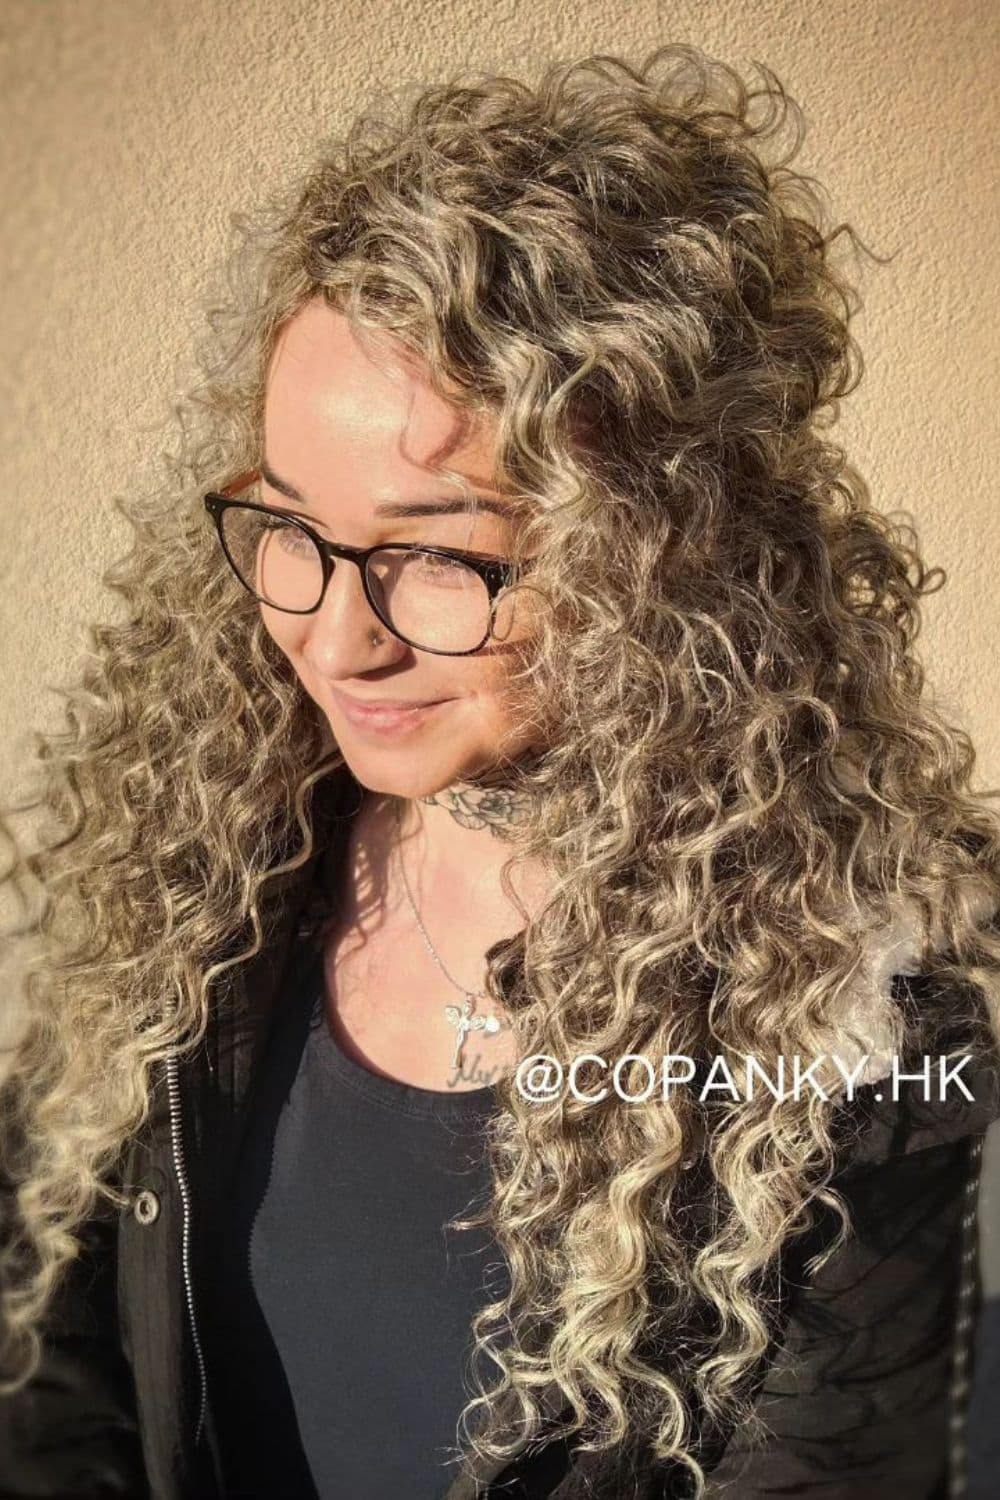 A woman with blonde crochet curls and eyeglasses.